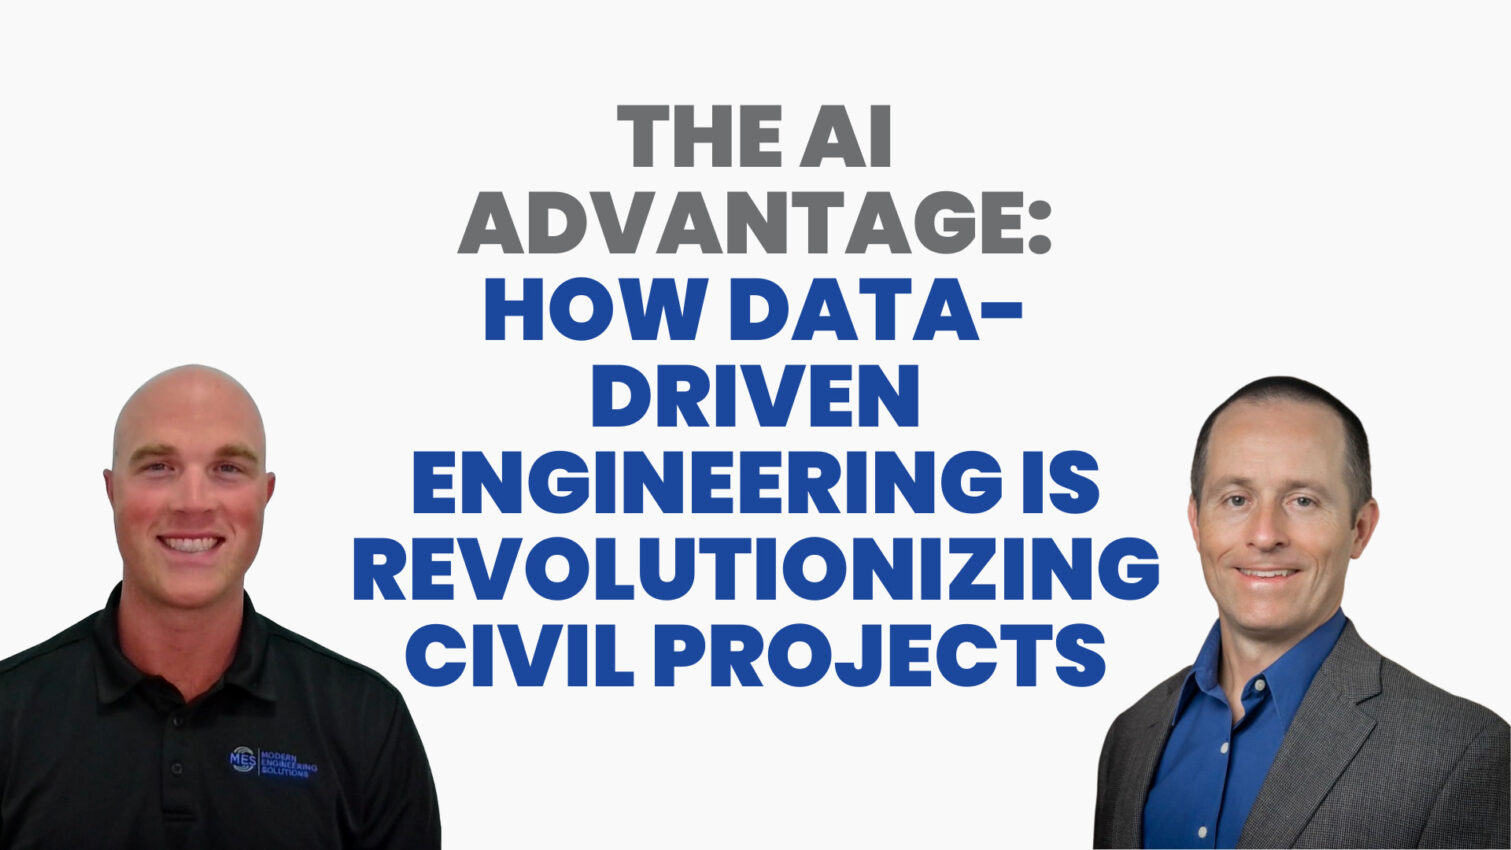 The AI Advantage: How Data-Driven Engineering is Revolutionizing Civil Projects